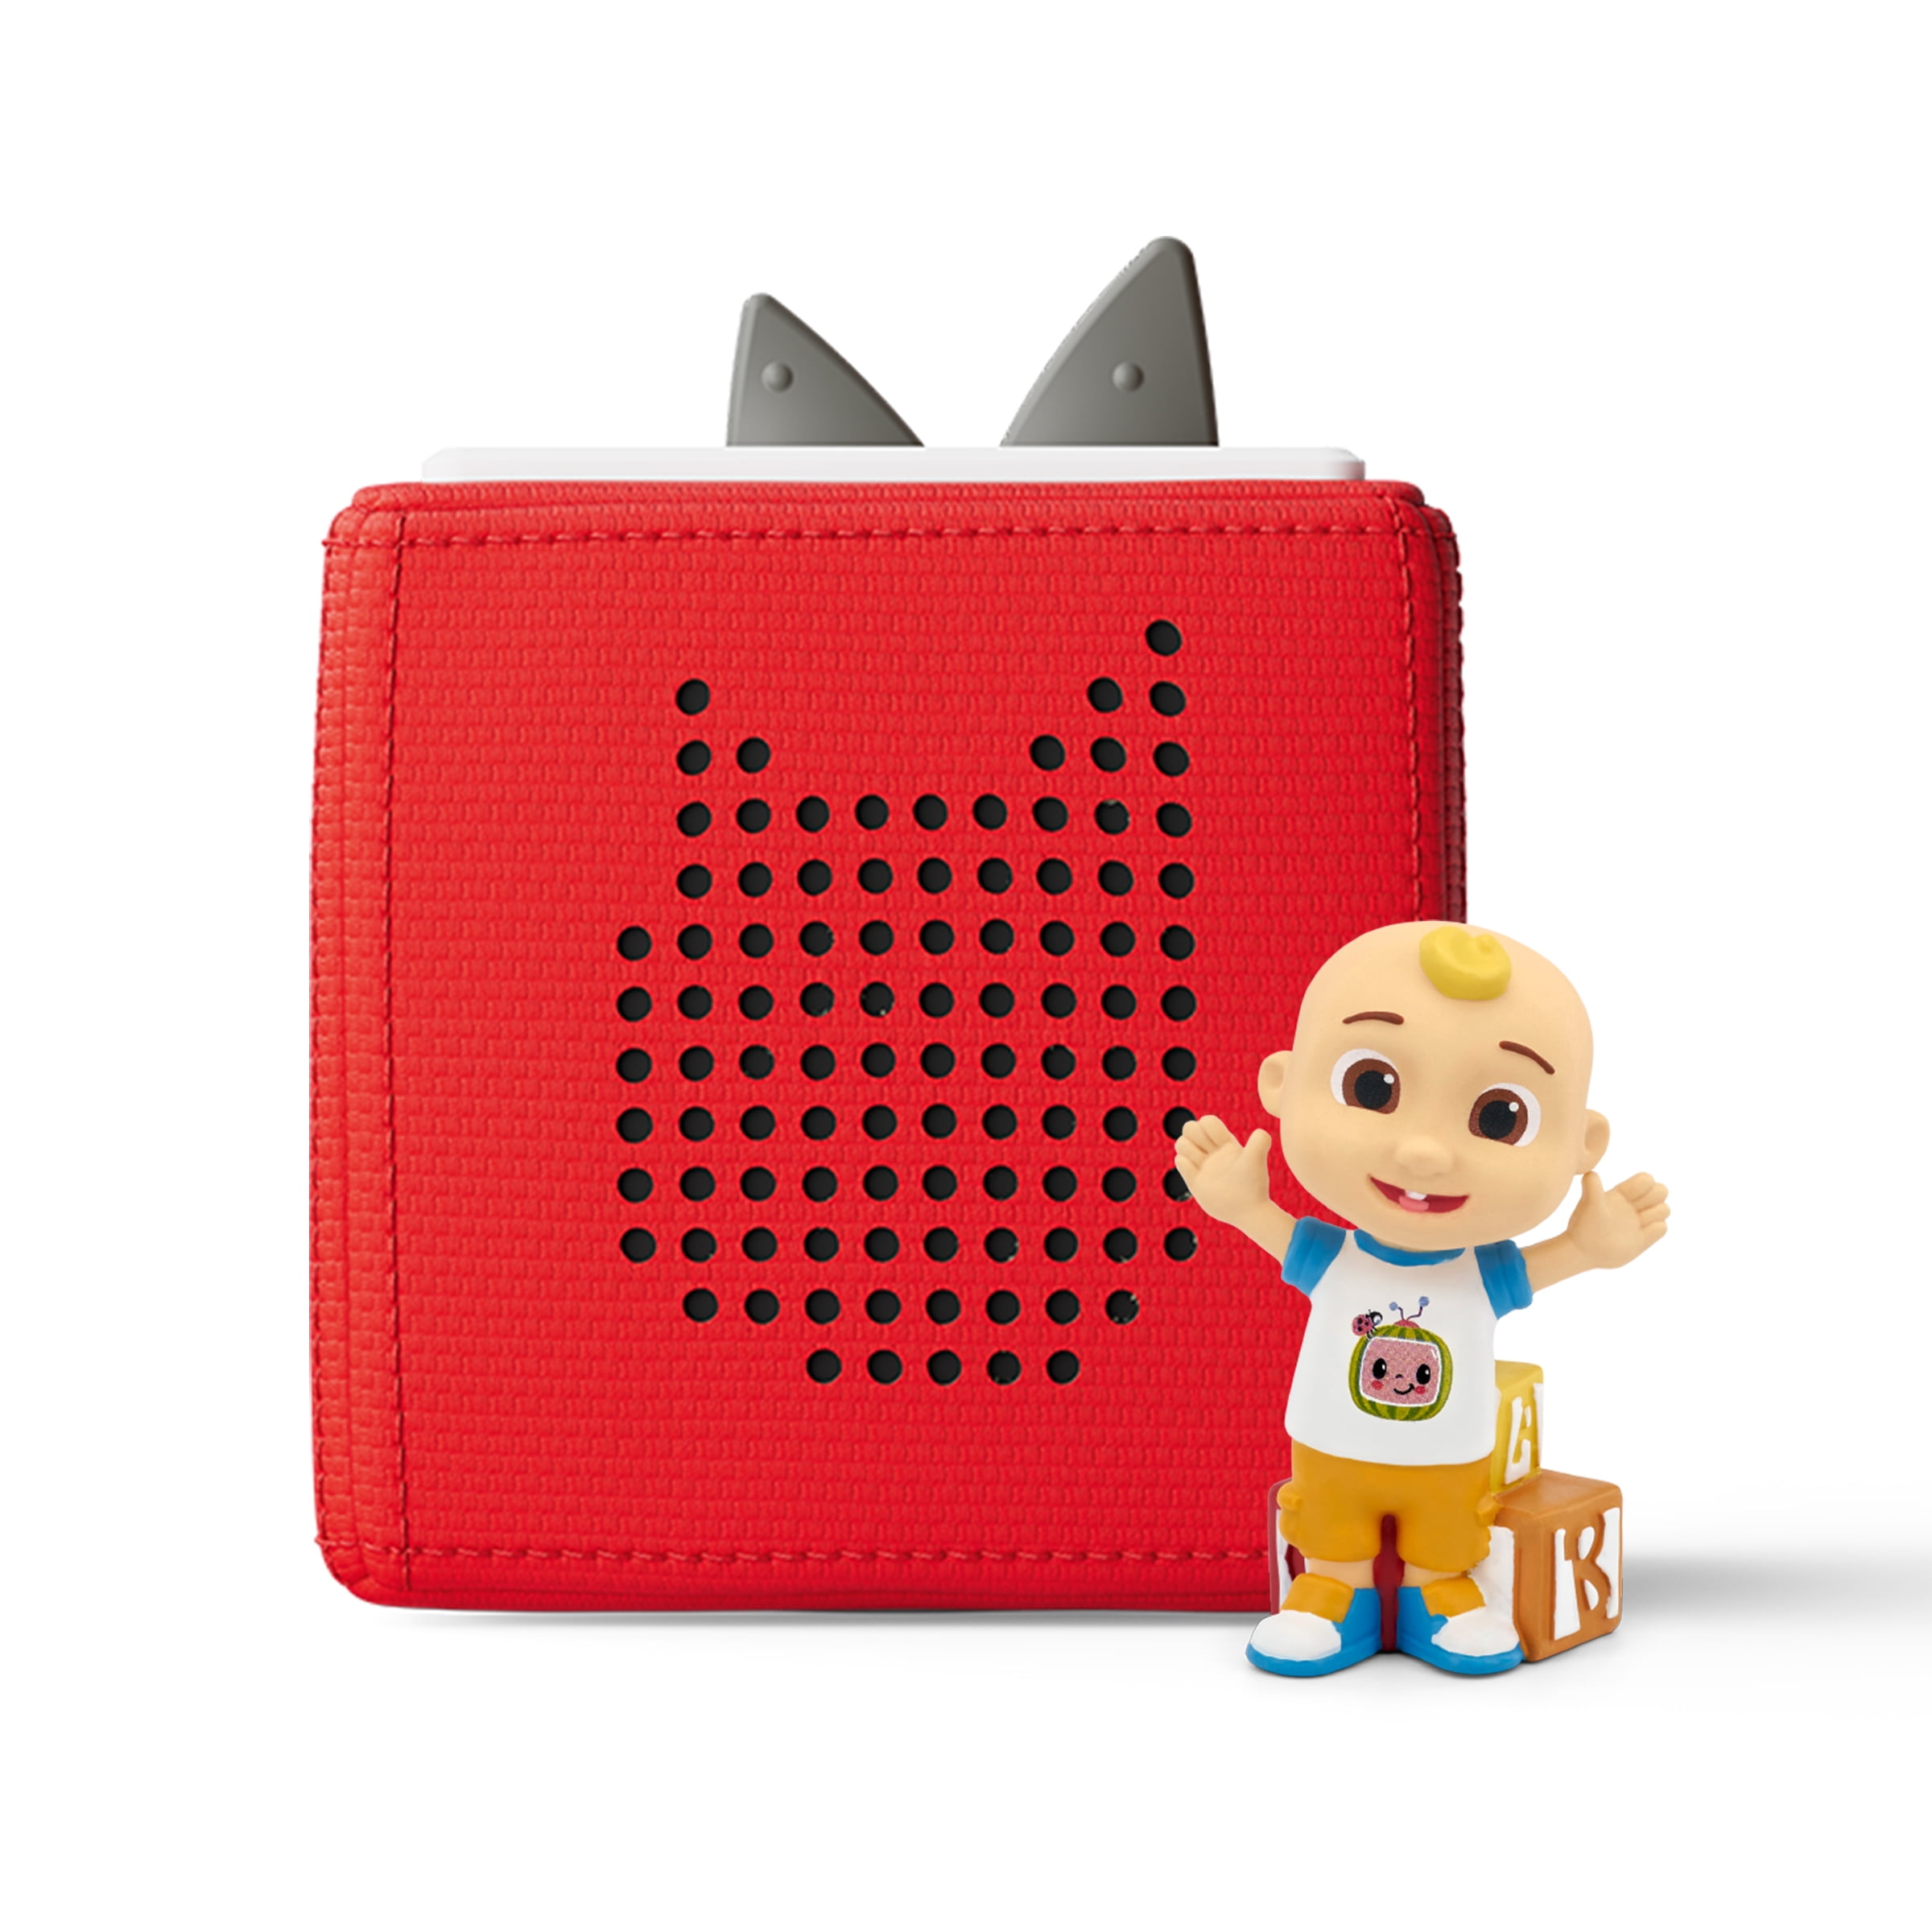 Toniebox gives kids safe and screen-free storytime - Reviewed